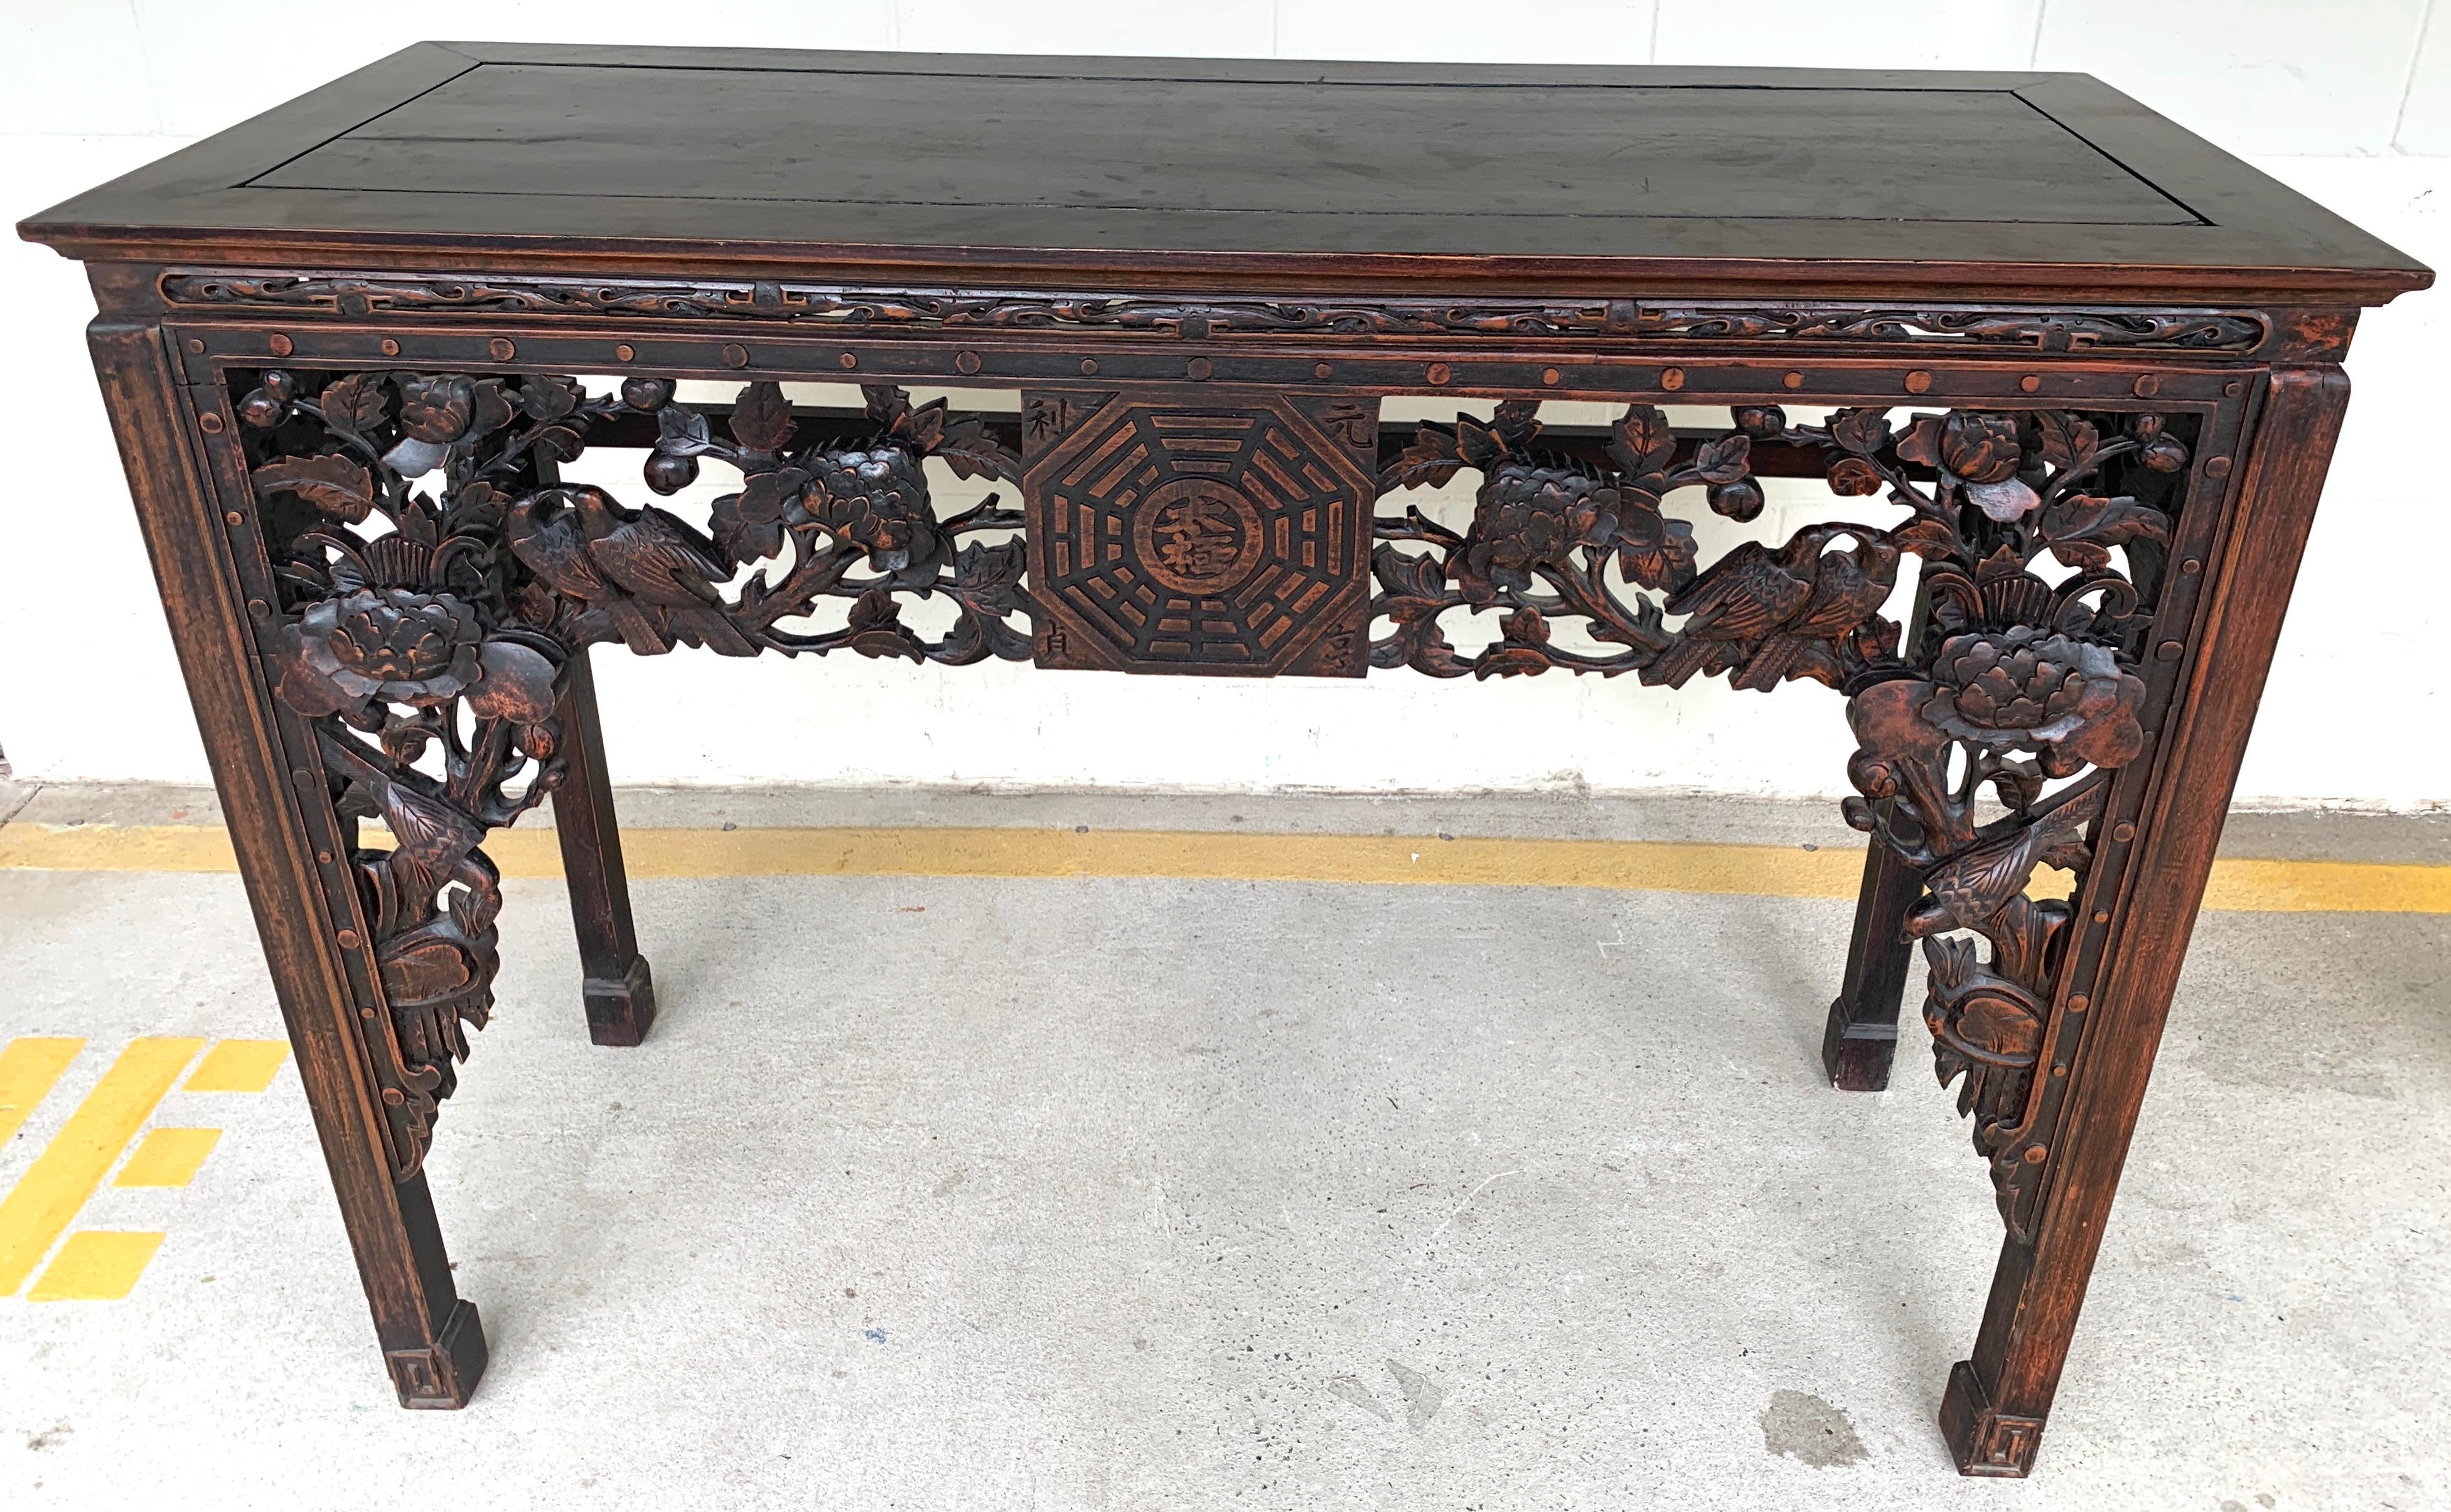 19th century Chinese export hardwood altar table, of rectangular form, with finely carved pierced front and sides with birds and foliage with central Chinese’s medallion.